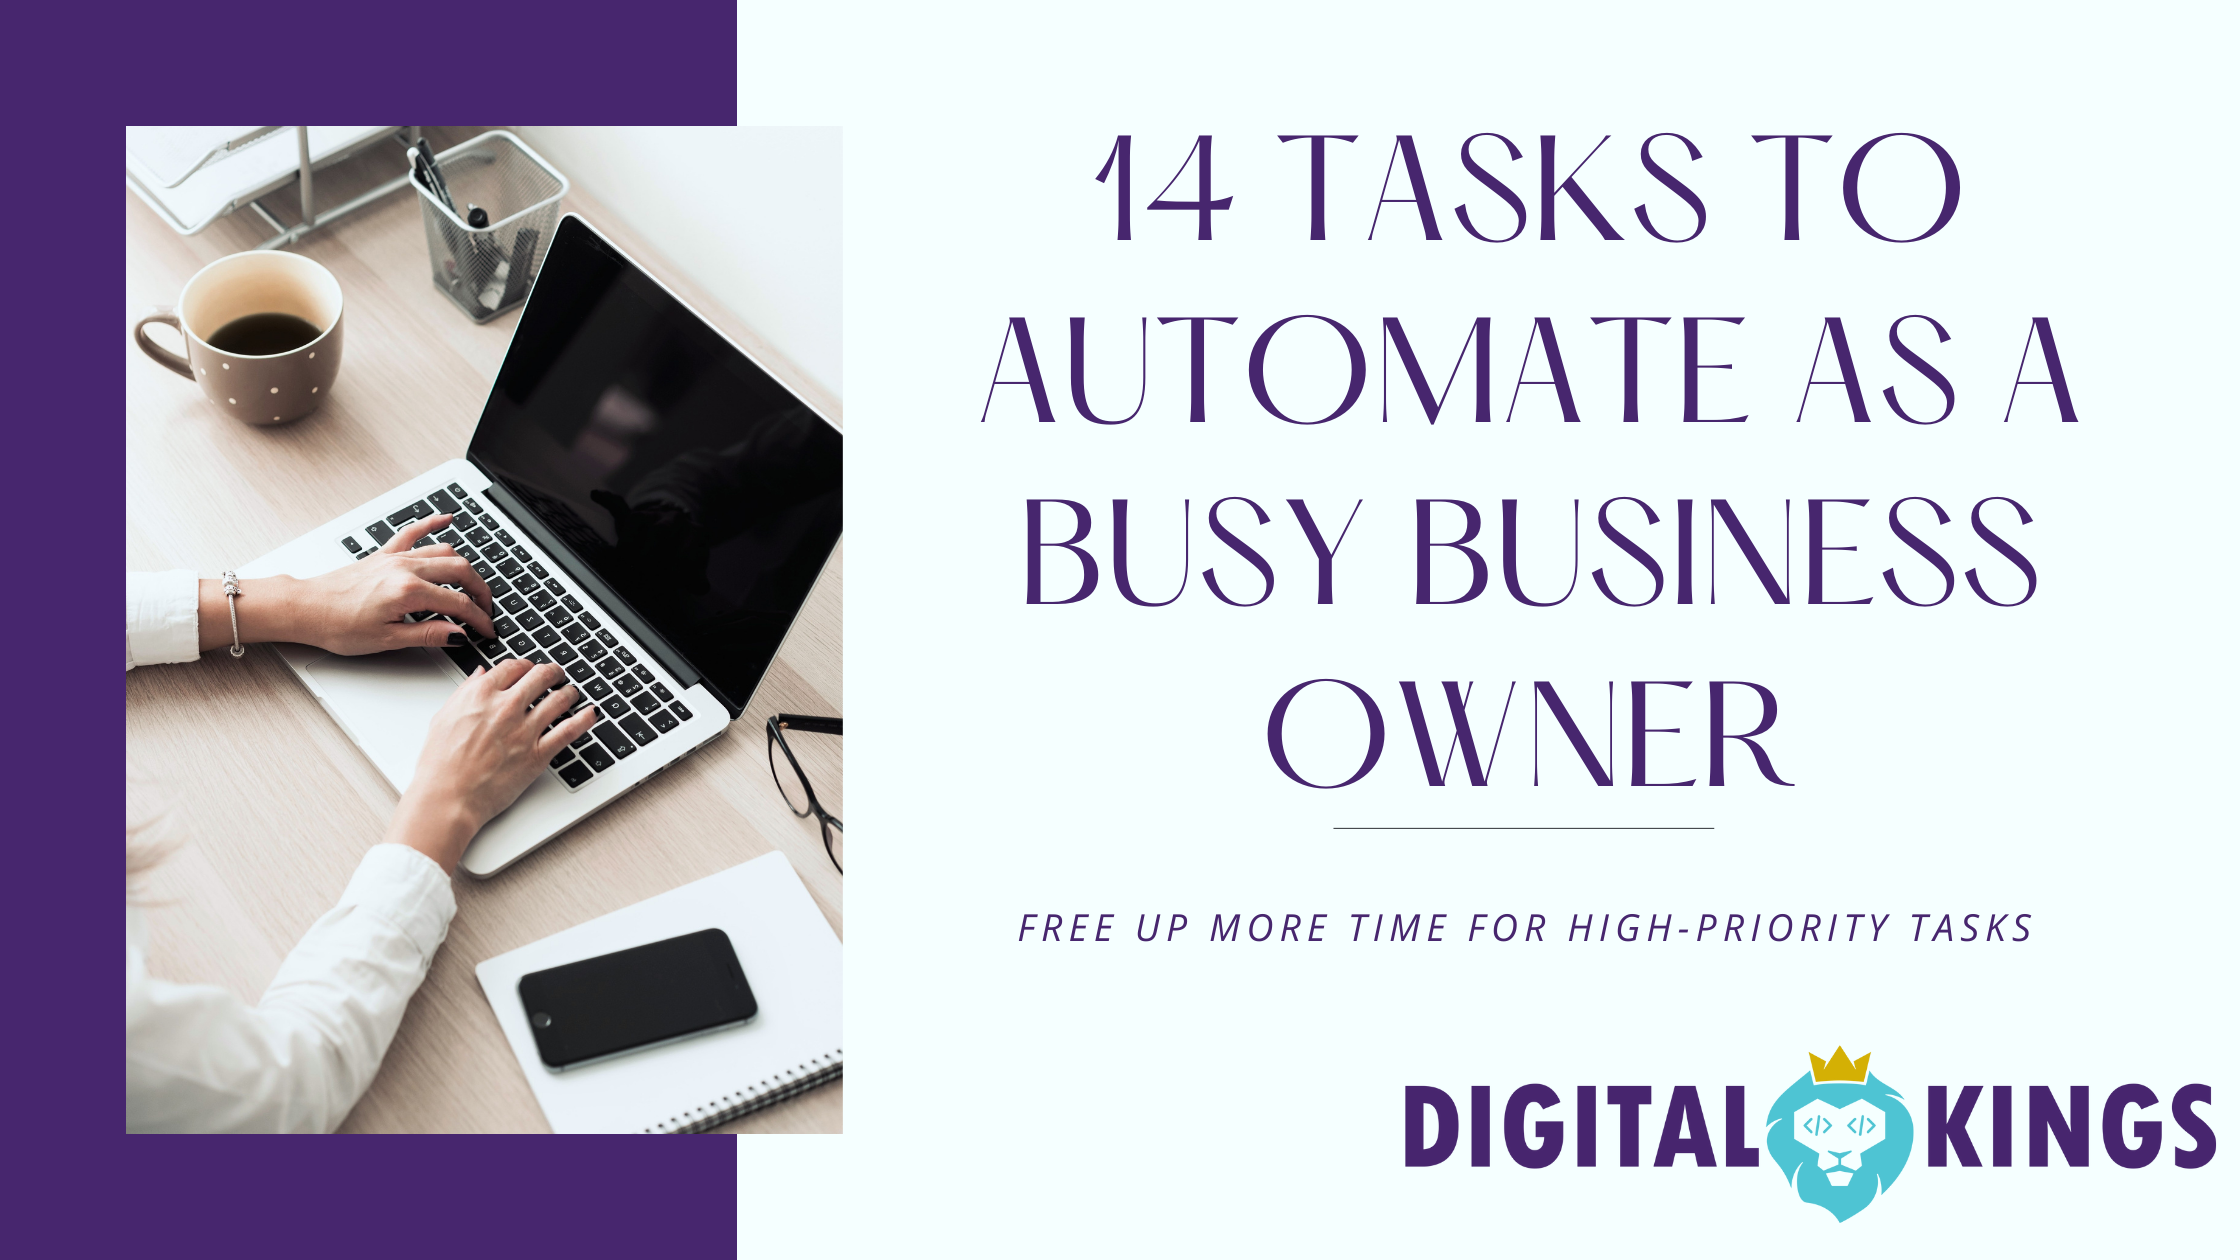 14 tasks to automate as a busy business owner